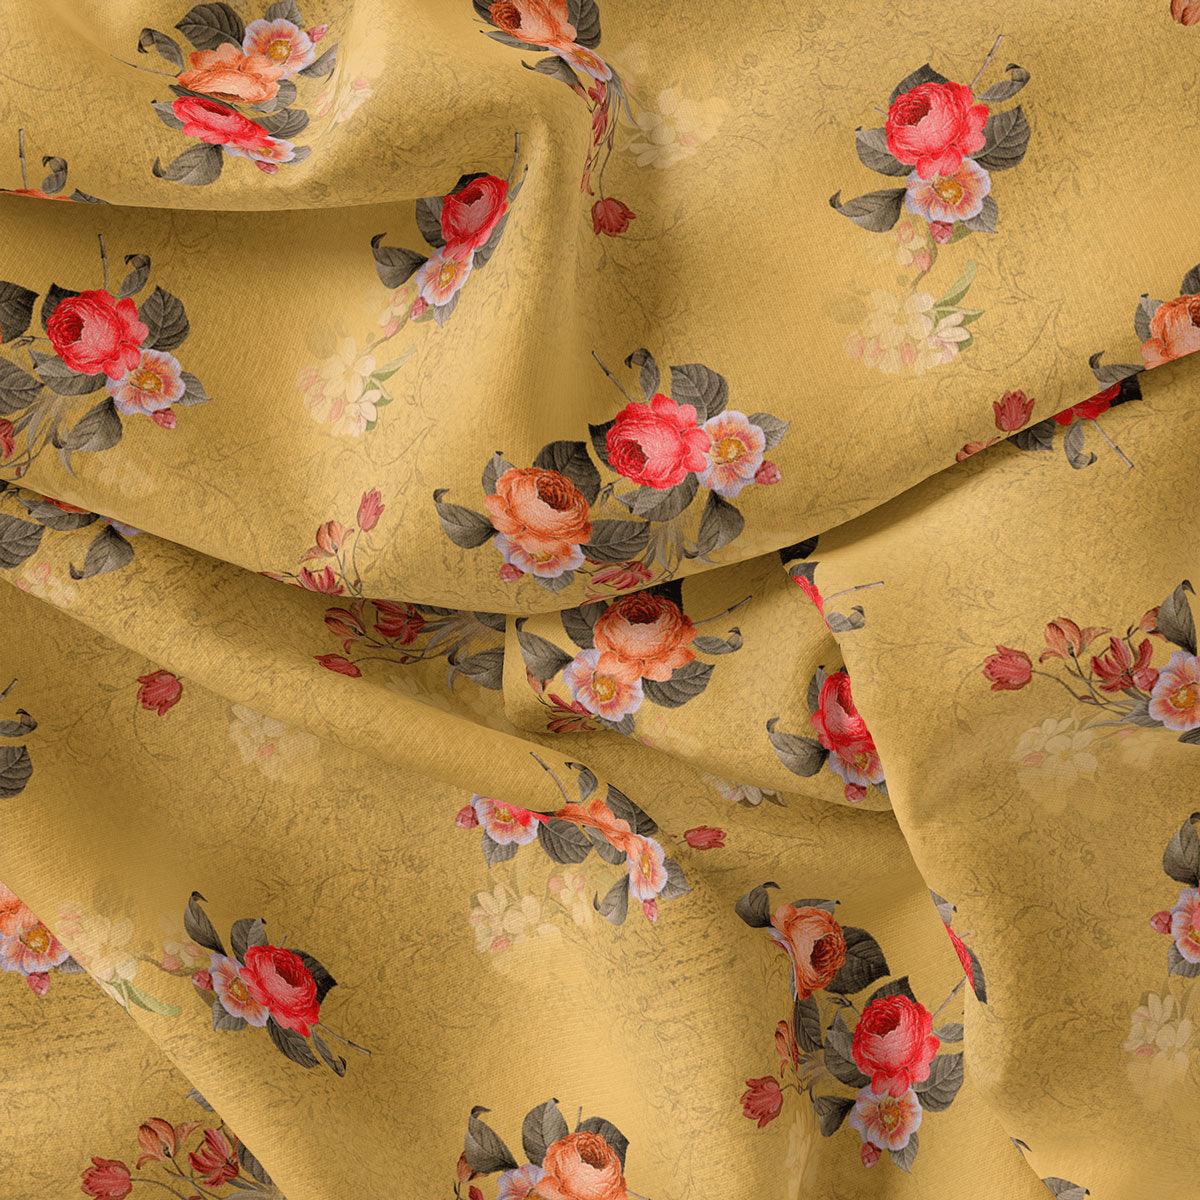 Golden Flower Printed Pure Georgette Fabric Material - FAB VOGUE Studio®